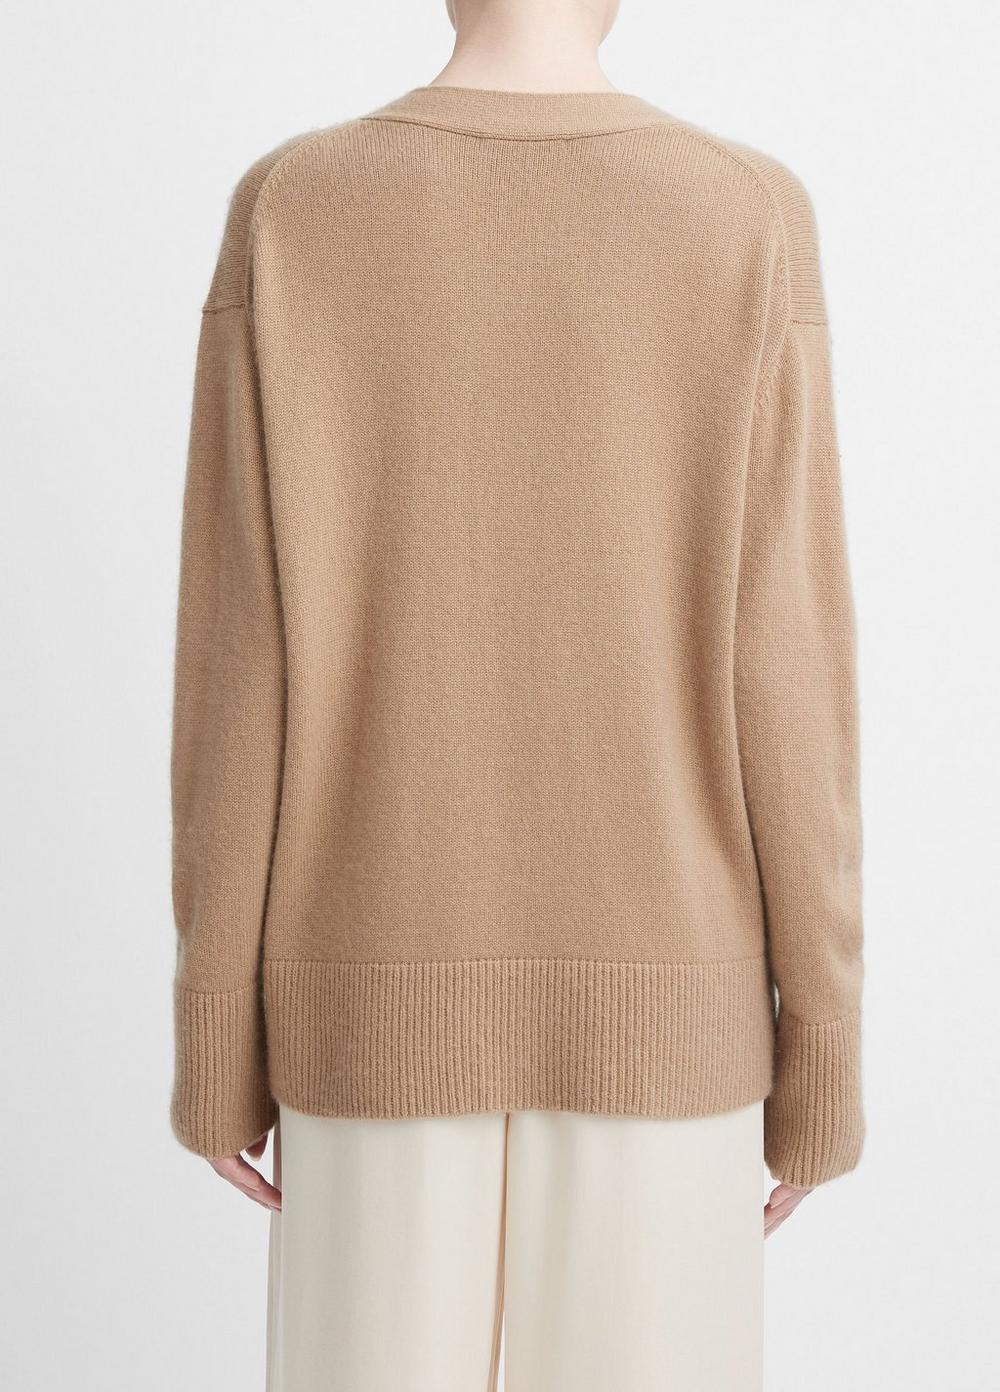 Wool and Cashmere Weekend Cardigan in Cardigans | Vince